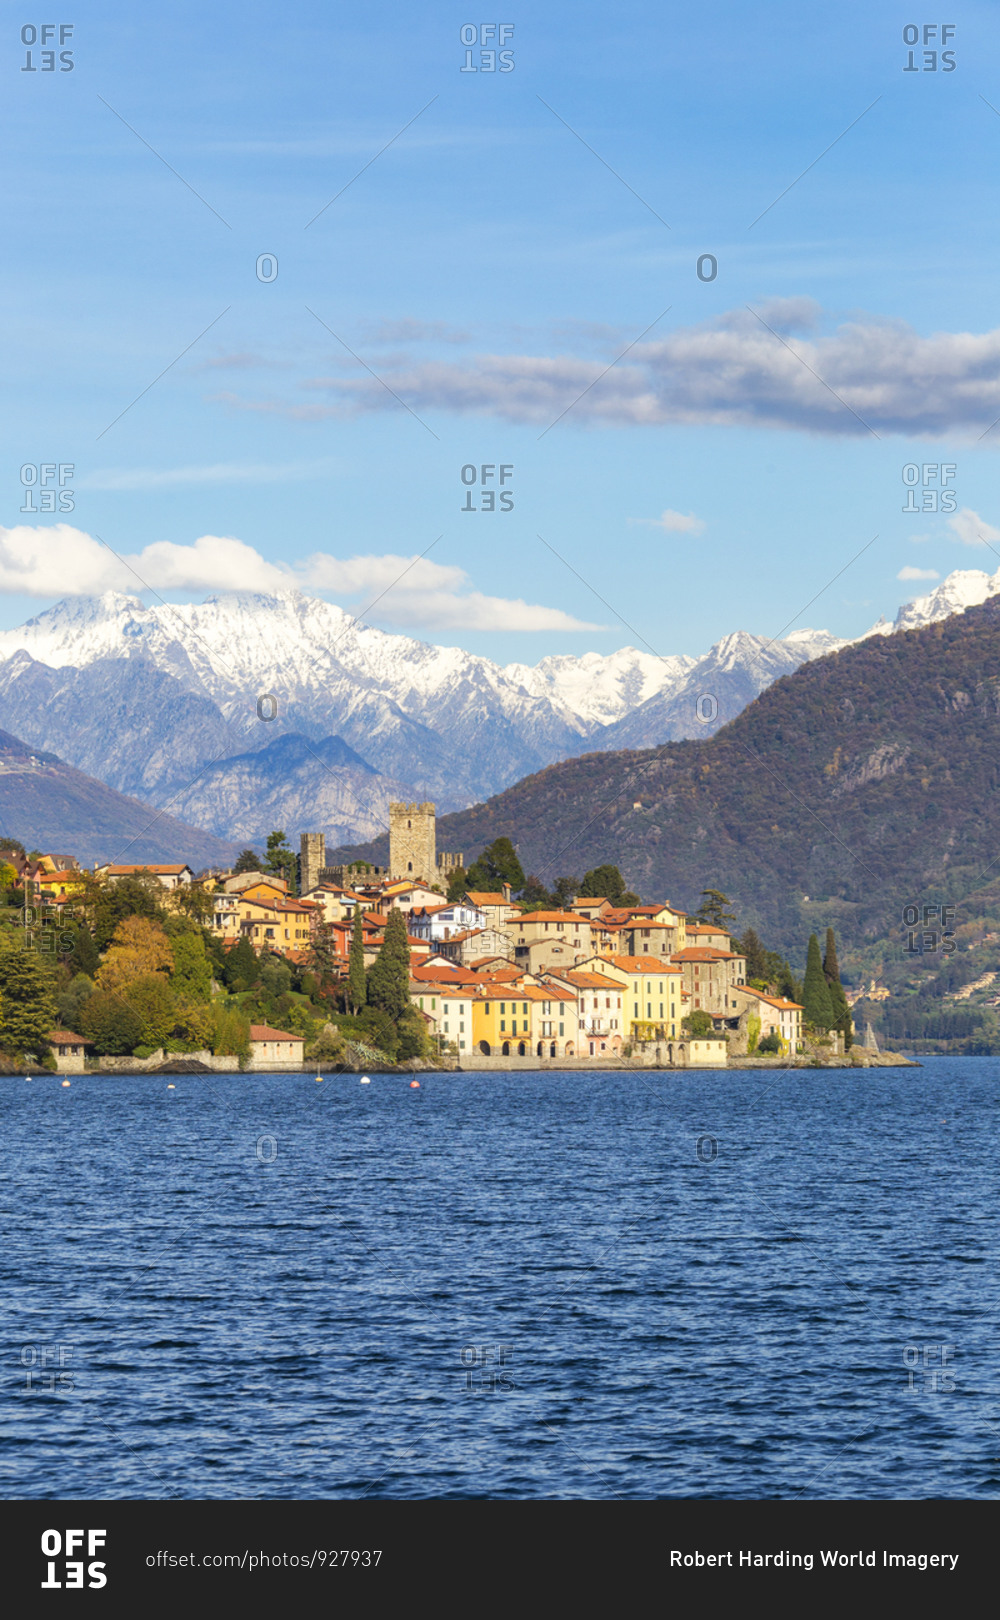 Village of Rezzonico with snowcapped mountains in the background, Lake Como, Lombardy, Italian Lakes, Italy, Europe